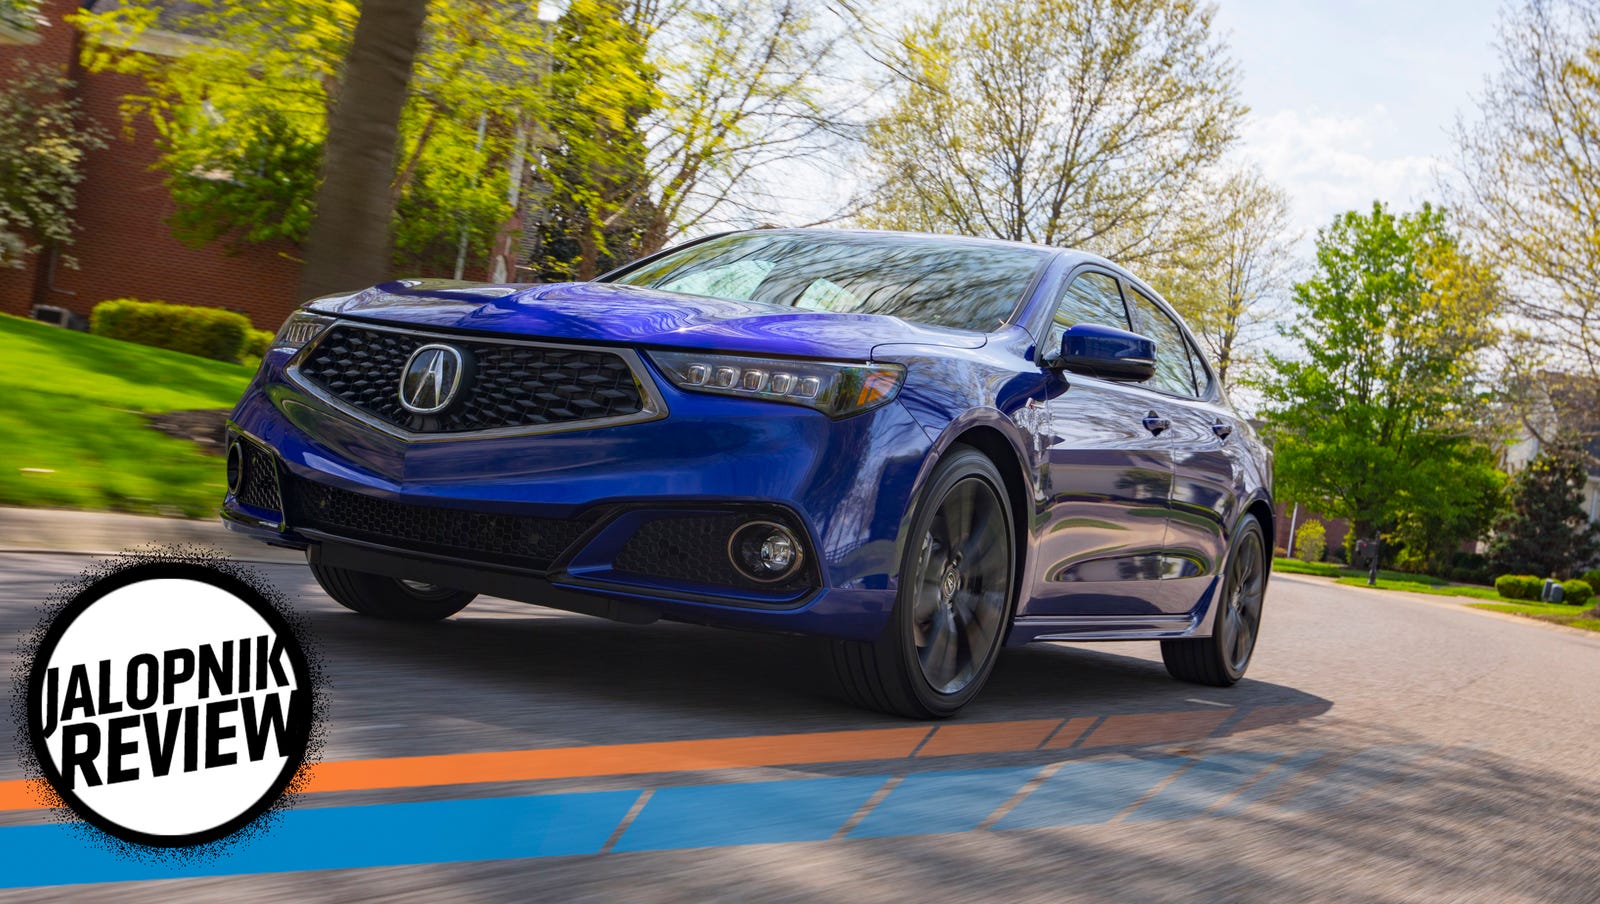 The 2018 Acura Tlx A Spec Is A Sport Sedan Without The Sport